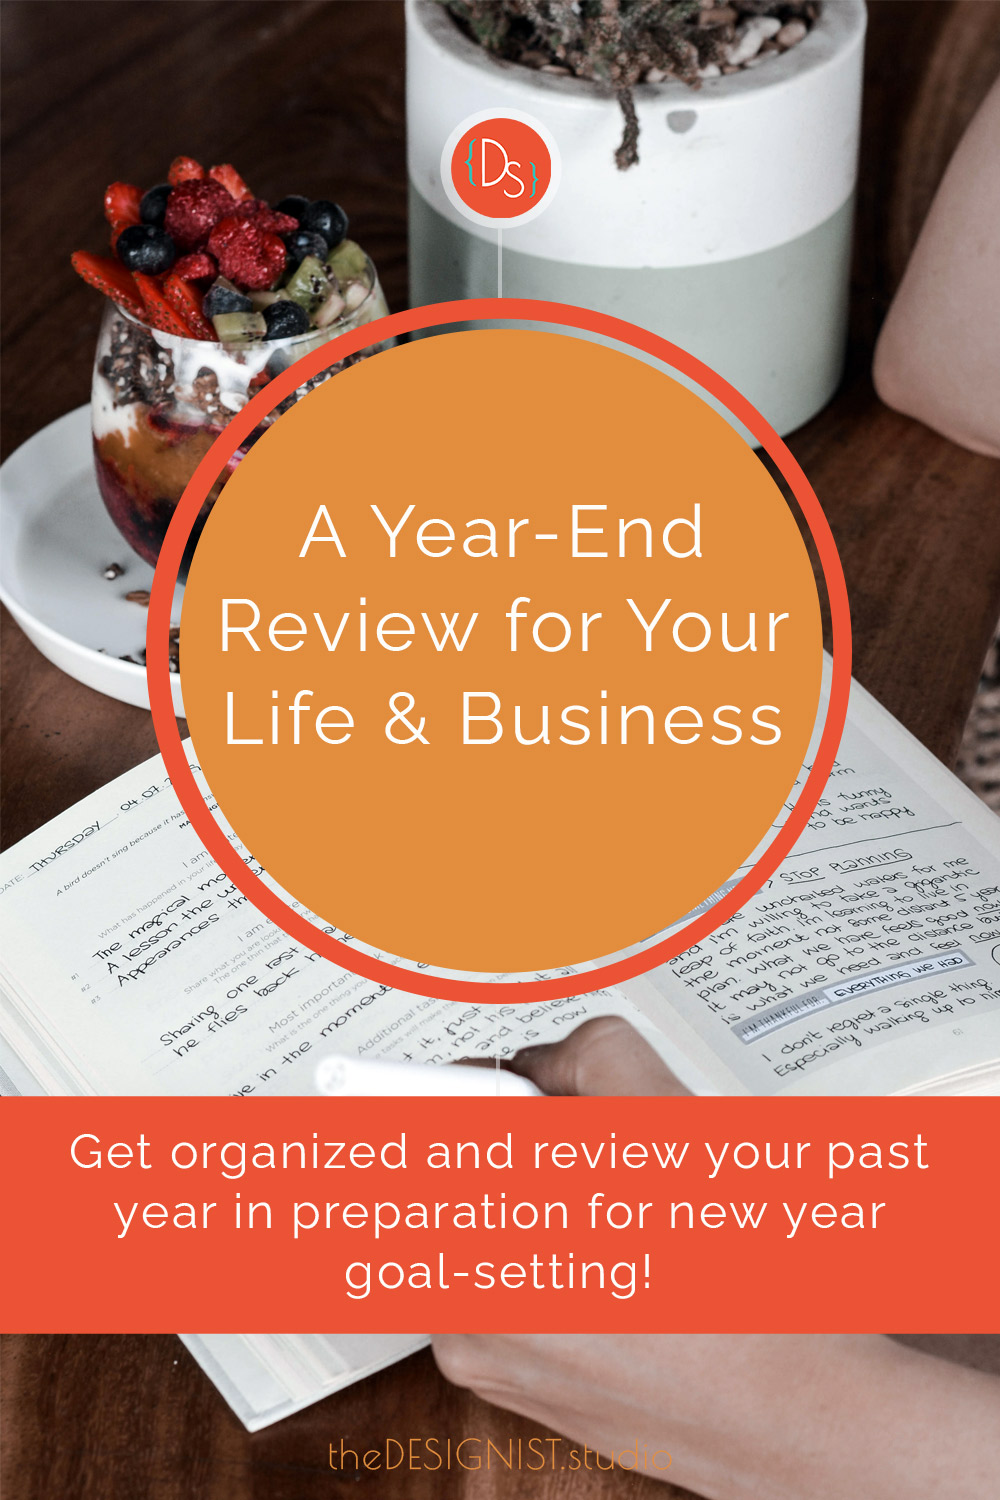 A Year-End Review for Your Life & Business